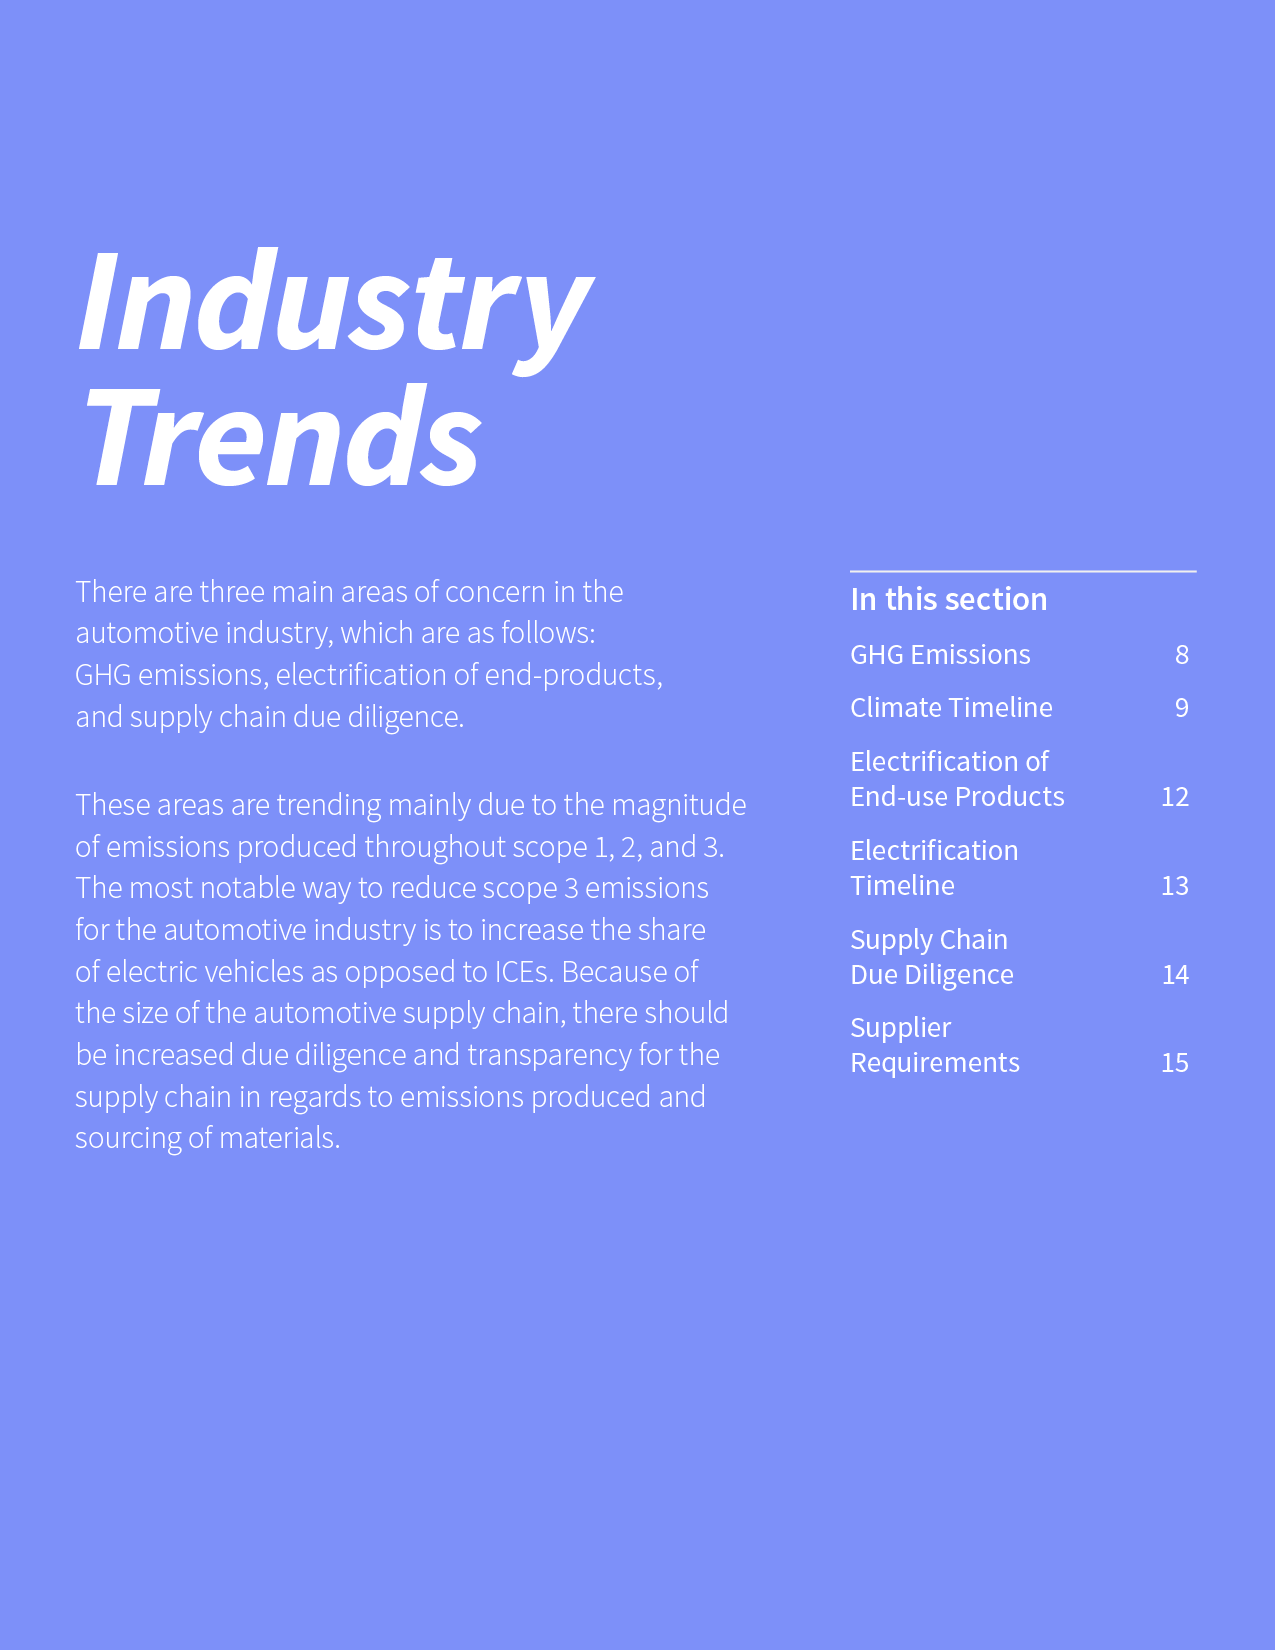 Foresight-Mgmt_Automotive-Industry-Report_2212123.png